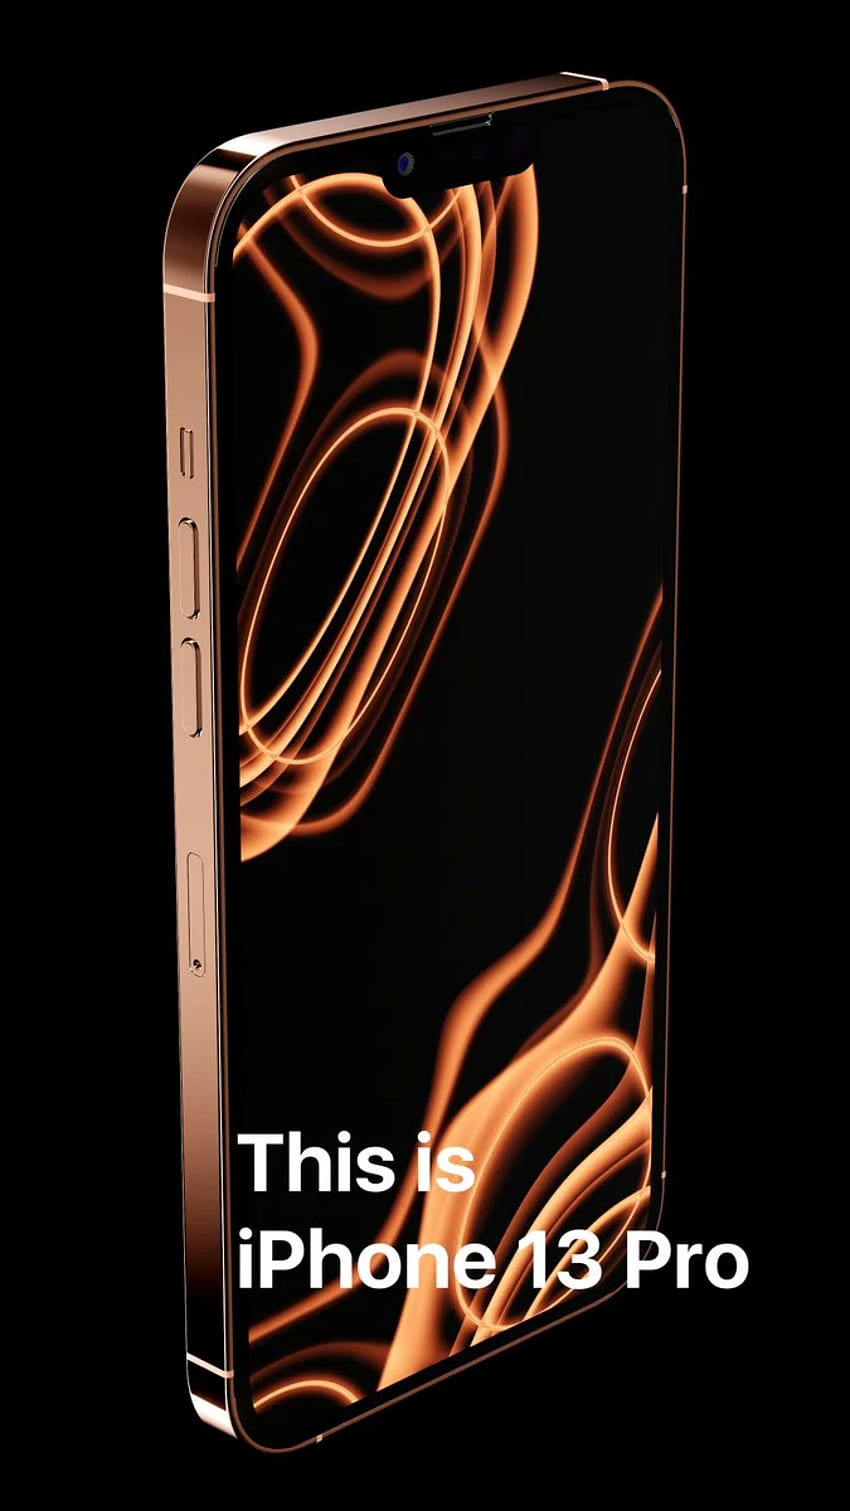 Vova LD - Incomparable brand new iPhone 13 Pro The absolute leader in everything. Bright Copper is here. *Render based on CAD drawings and leaks. Created HD phone wallpaper